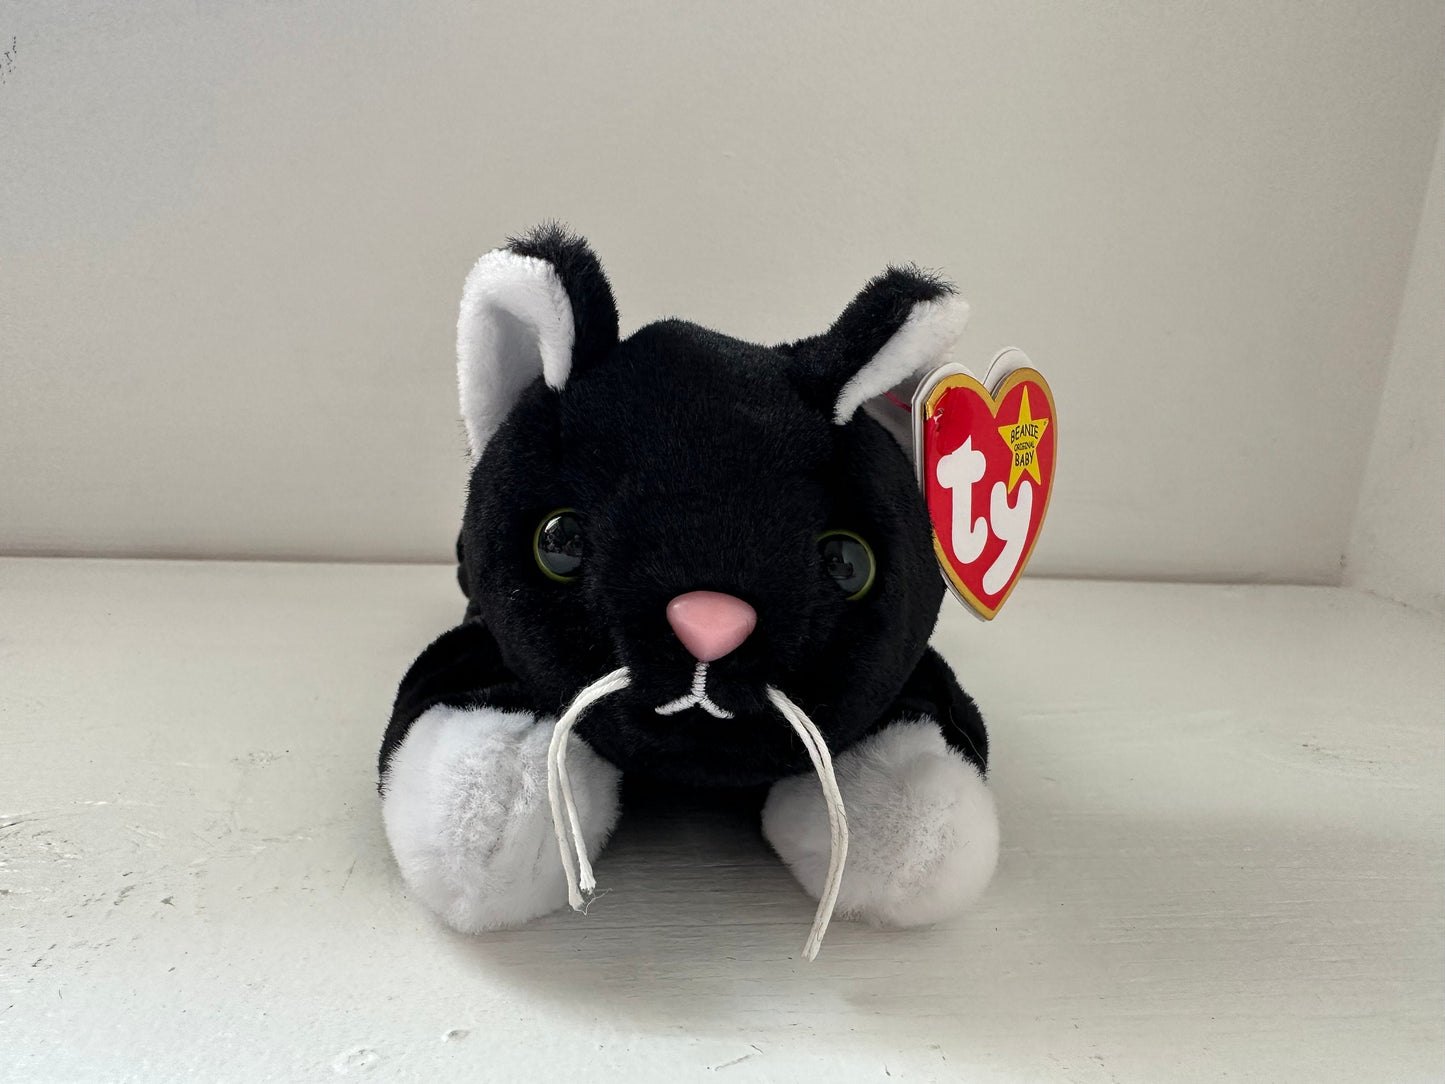 Ty Beanie Baby Zip II the Black Cat - Limited Production Rare! 30th Anniversary Beanie Baby Series! (6 inch)